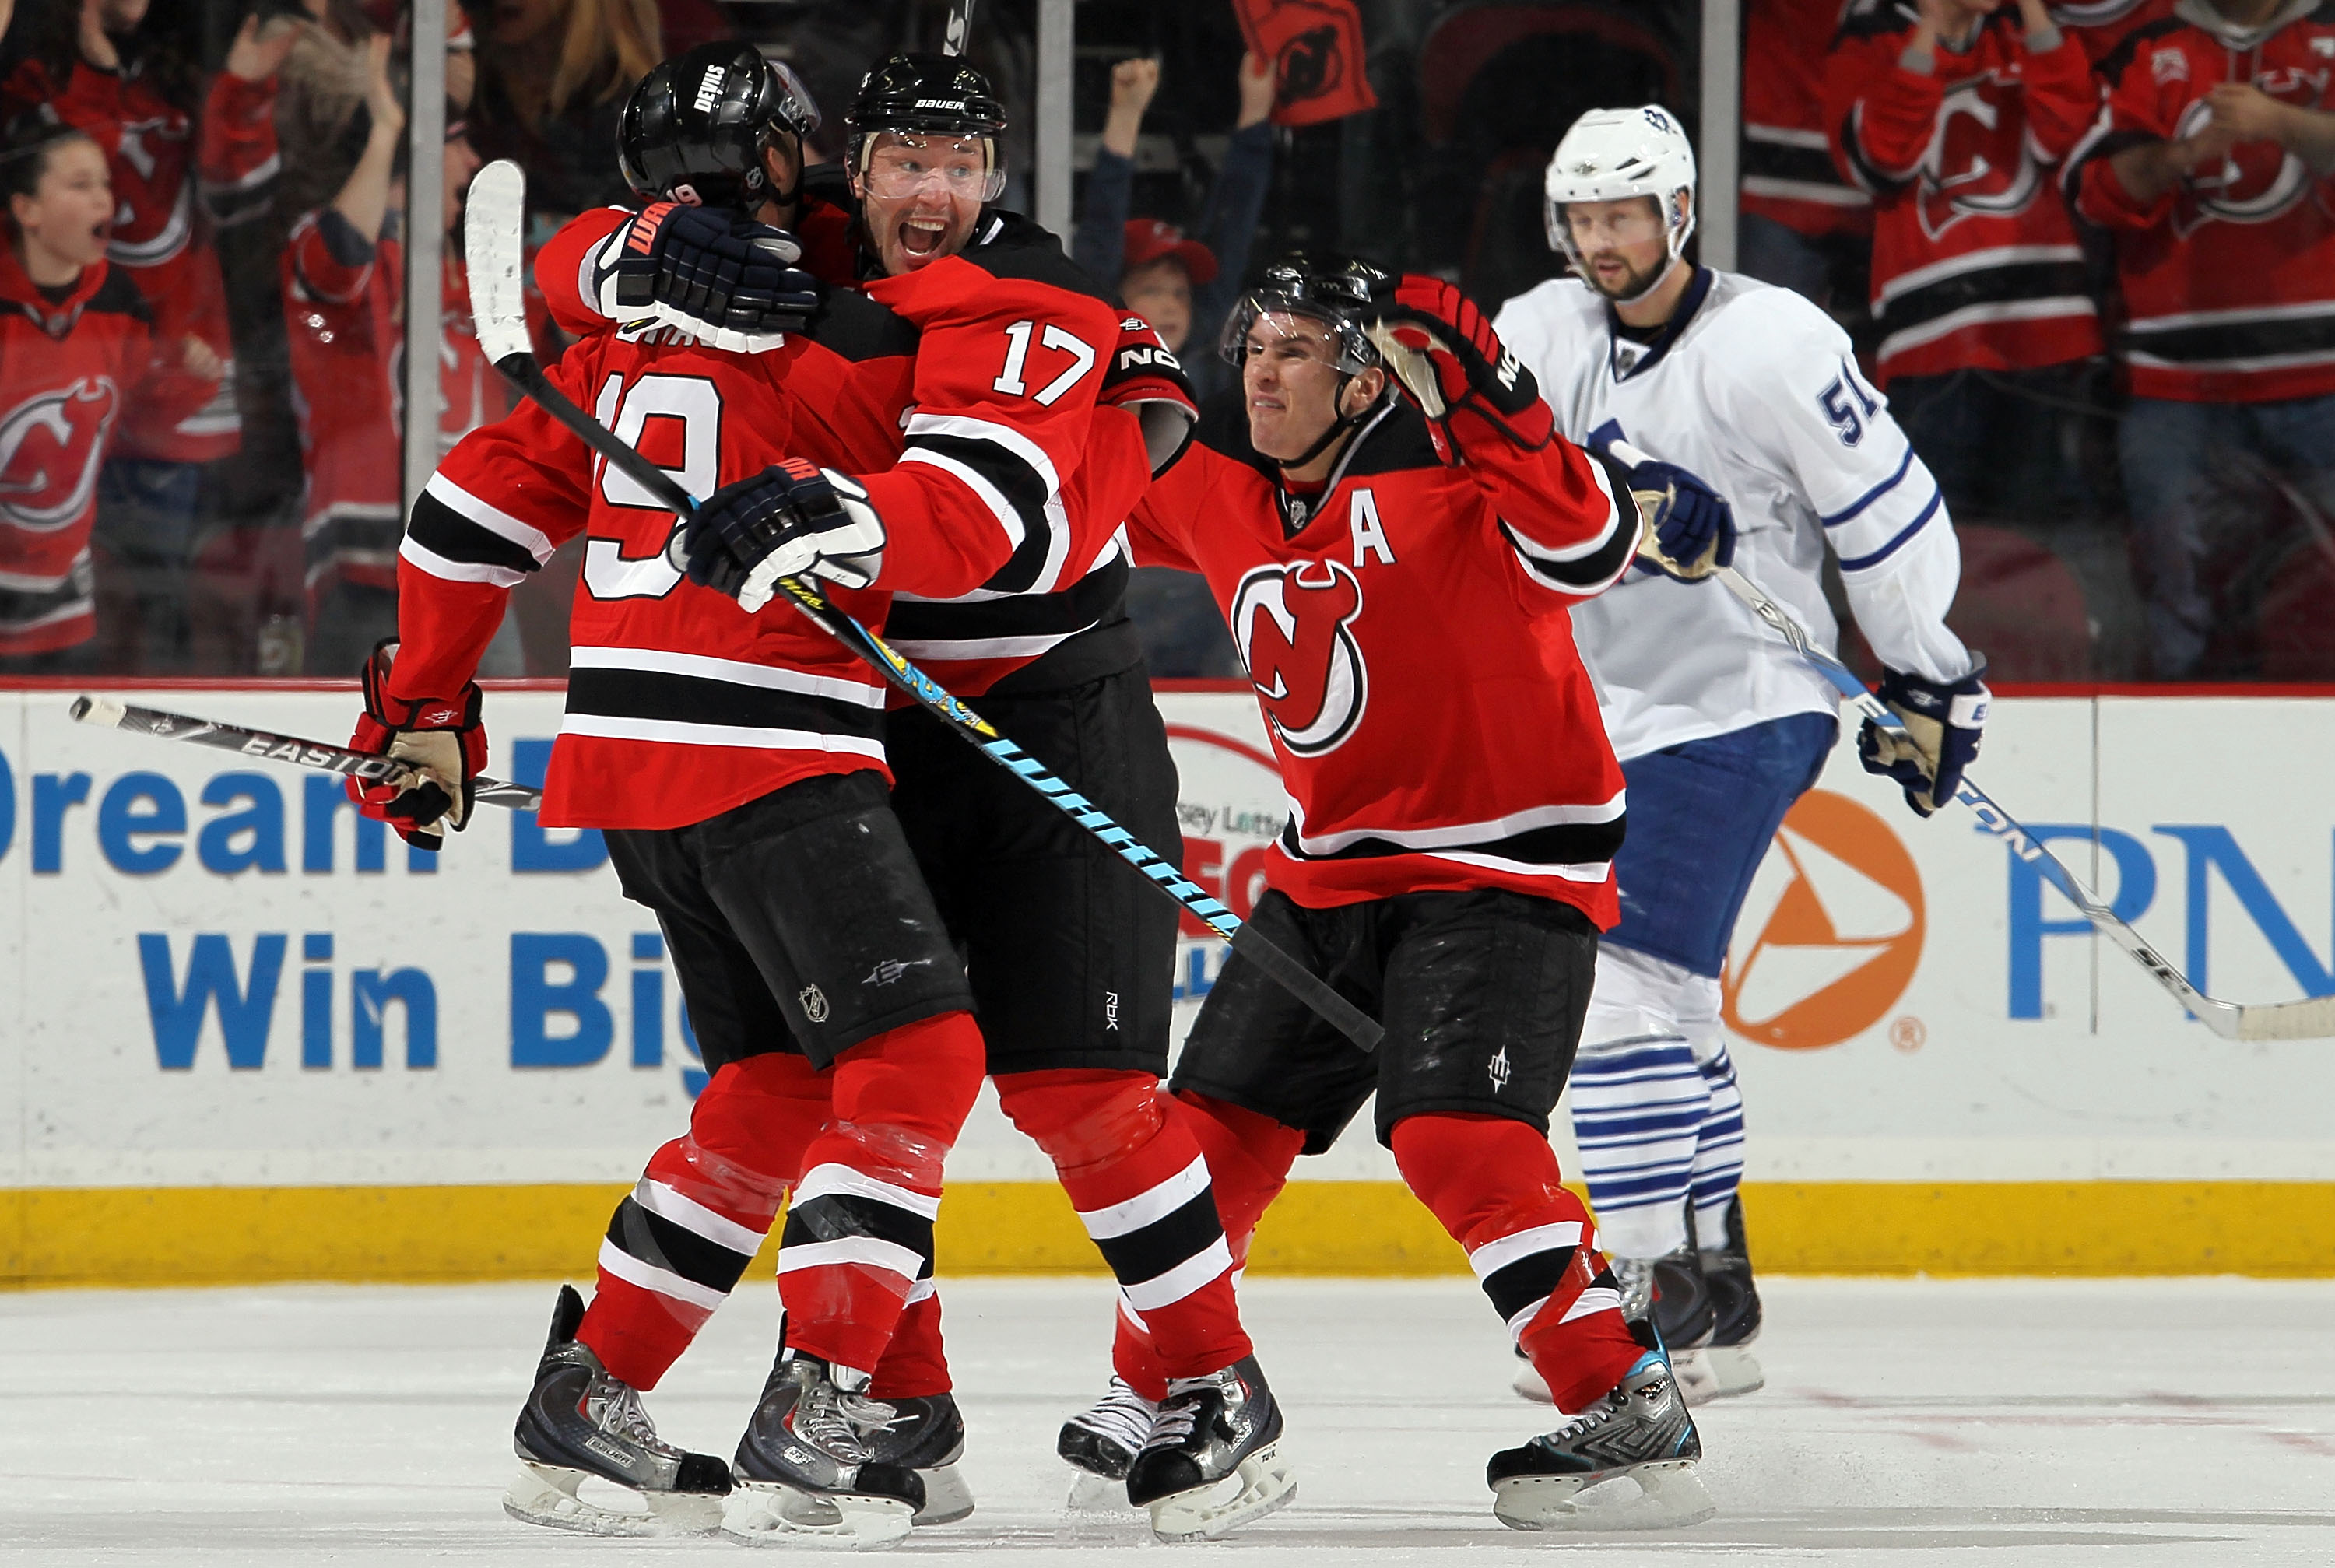 Prudential Center – New Jersey Devils